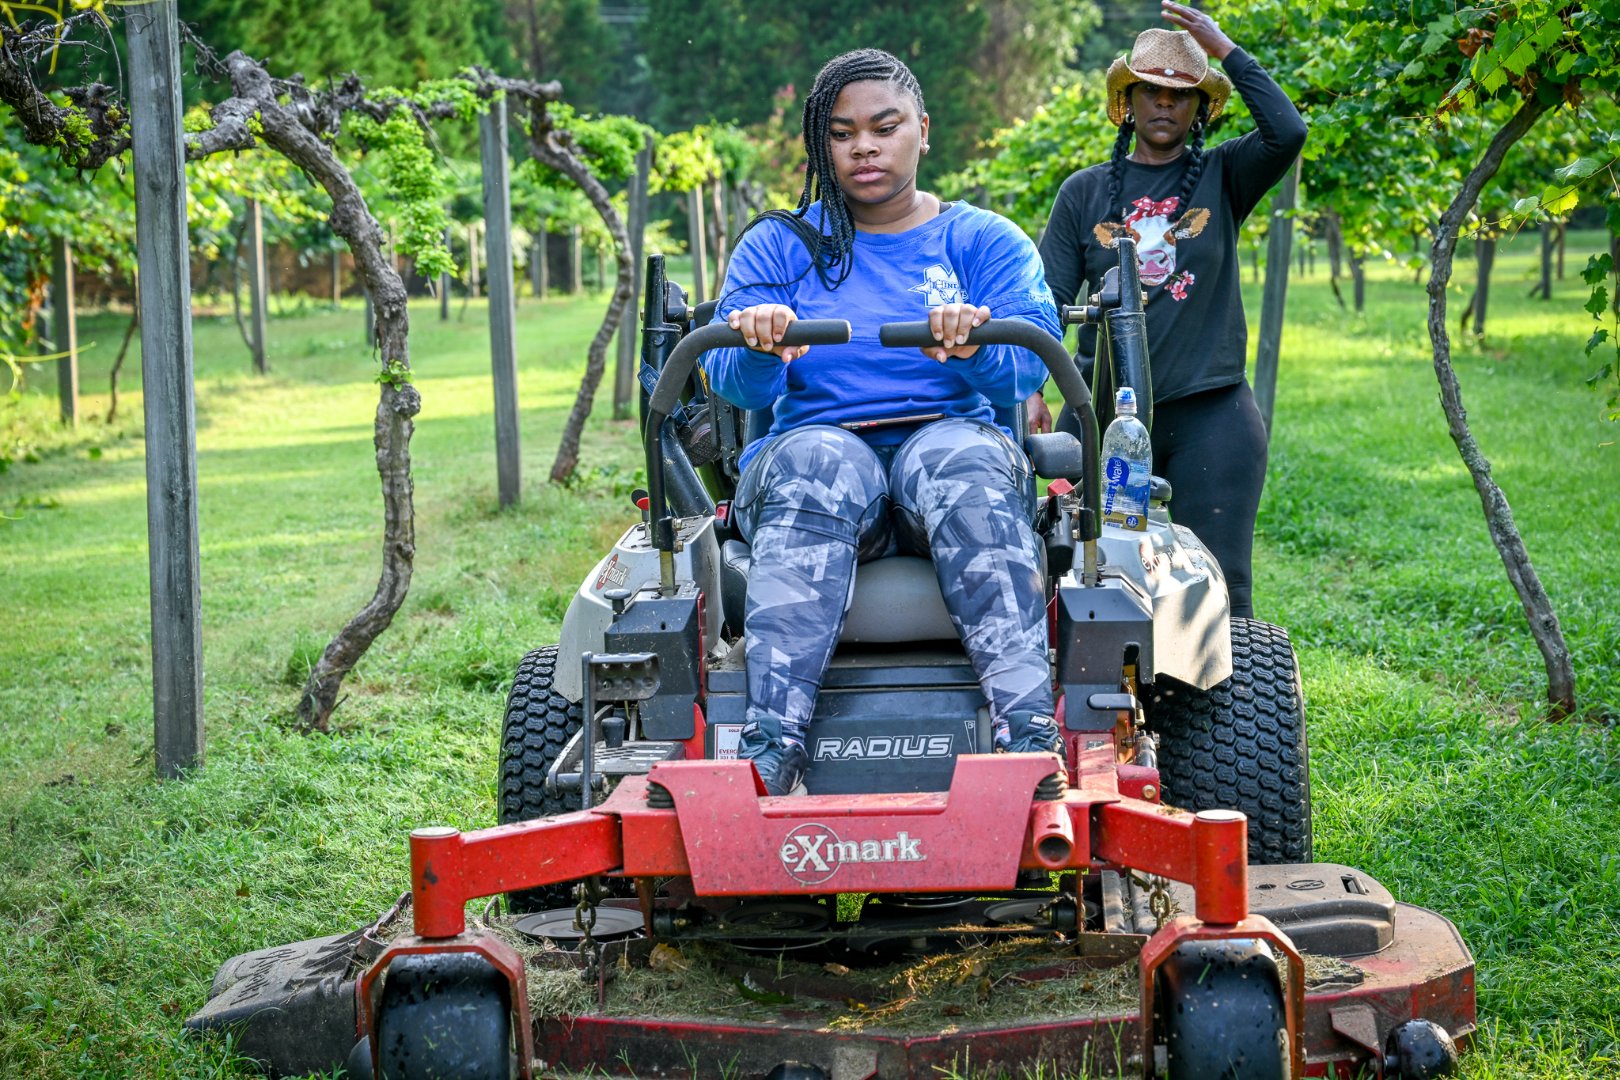 Fort Valley State University senior Kyra Holmes steers a zero-turn mower, while Crawford County, Georgia, farmer Darlene Williams Roberts instructs her.